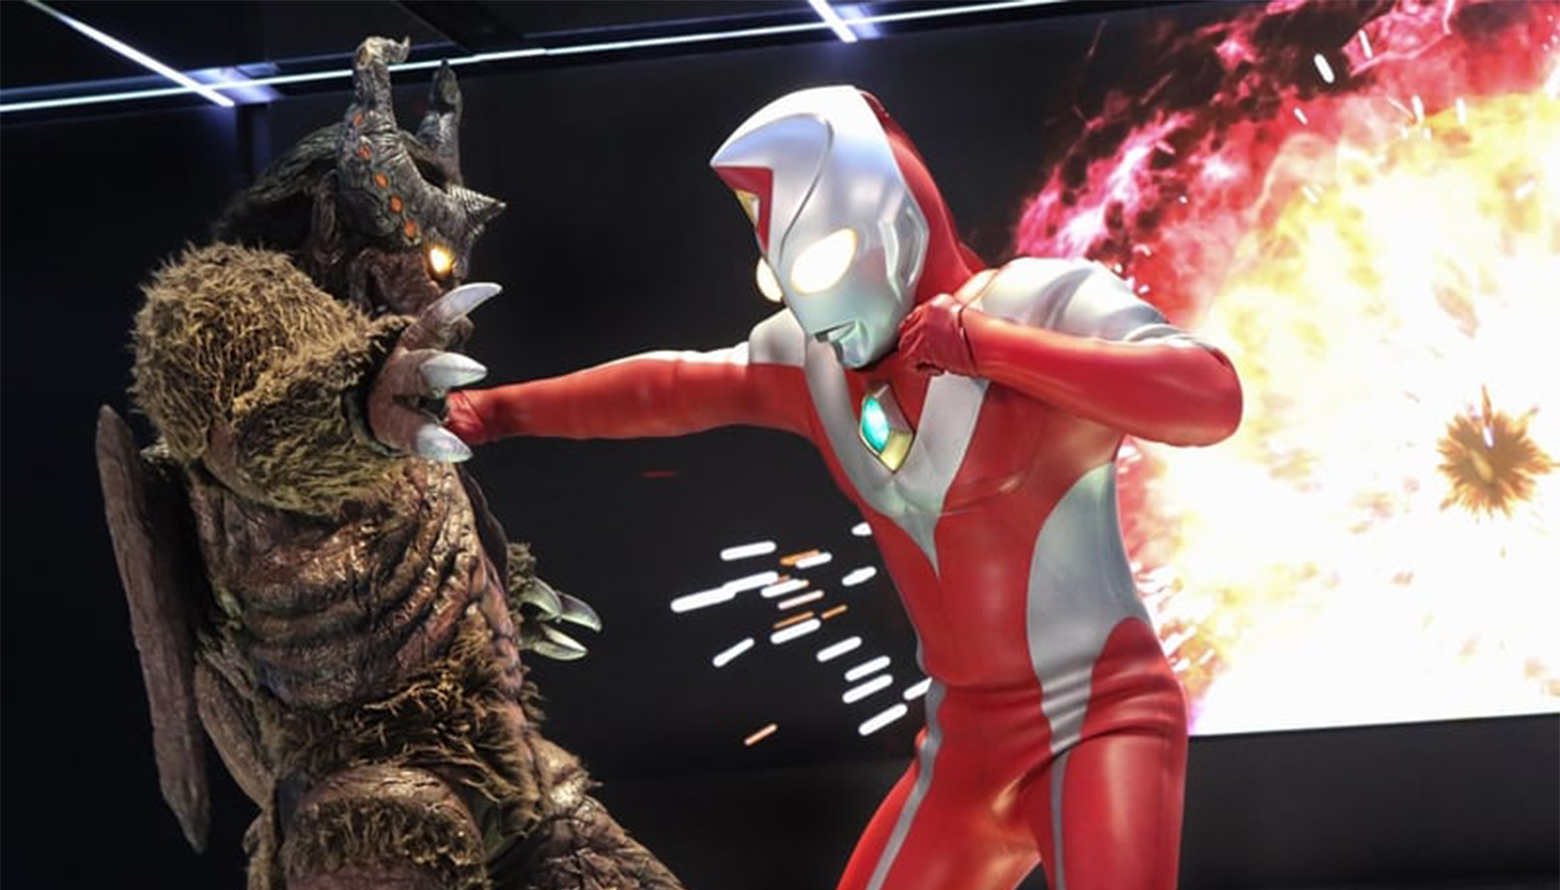 ULTRAMAN CONNECTION LIVE FEATURING DYNA & GAIA WOWS FANS WITH INCREDIBLE GUEST LINEUP, NEW TRAILER, AND MORE!